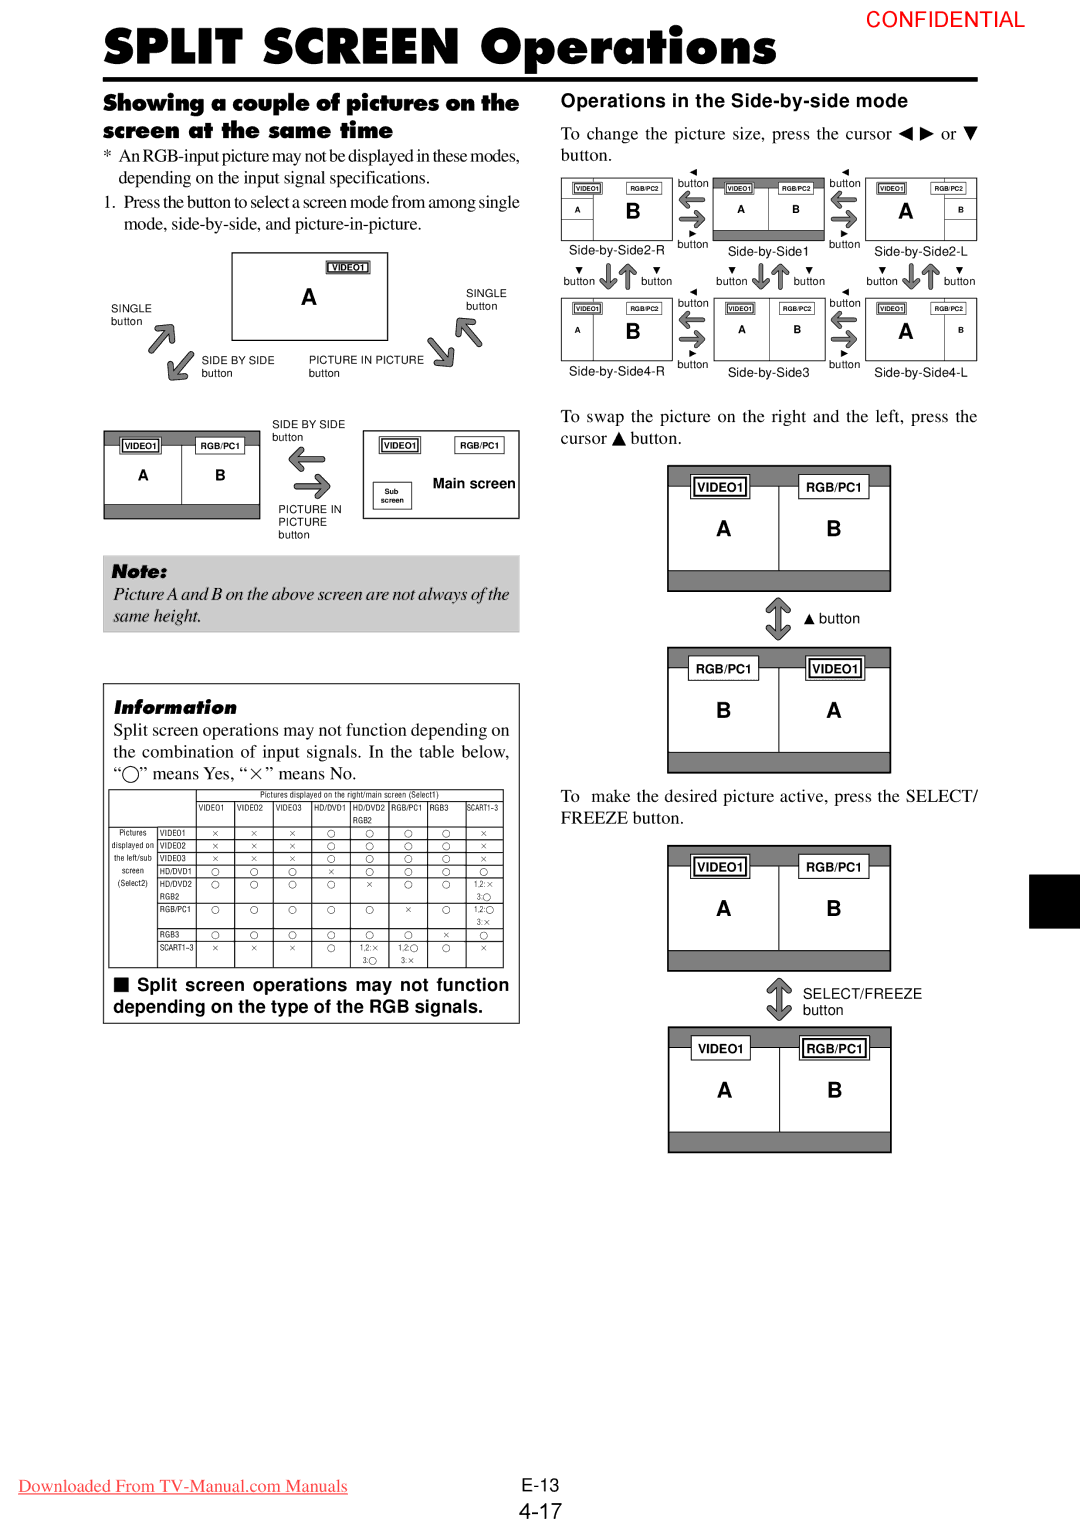 NEC 61XM3 user manual Split Screen Operations, Showing a couple of pictures on the screen at the same time 